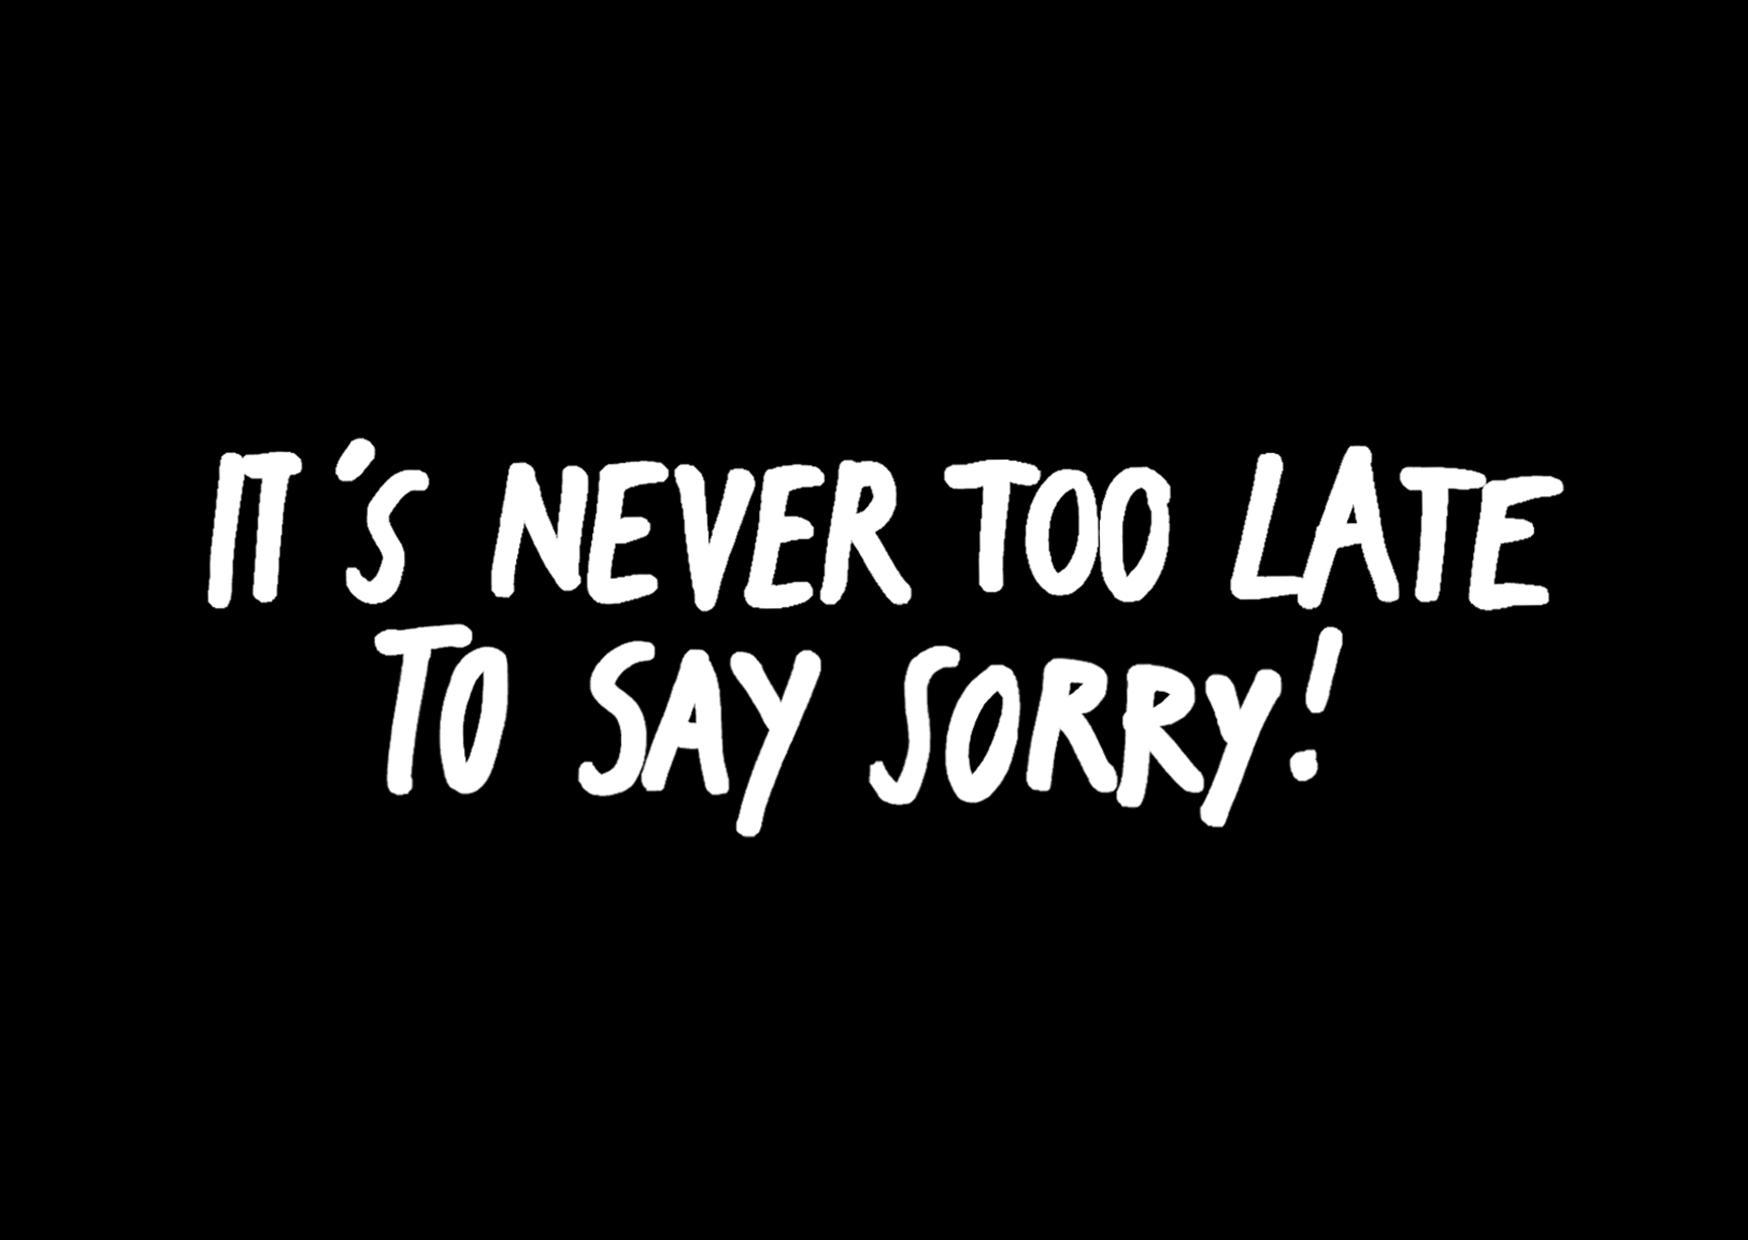 It’s Never Too Late to Say Sorry